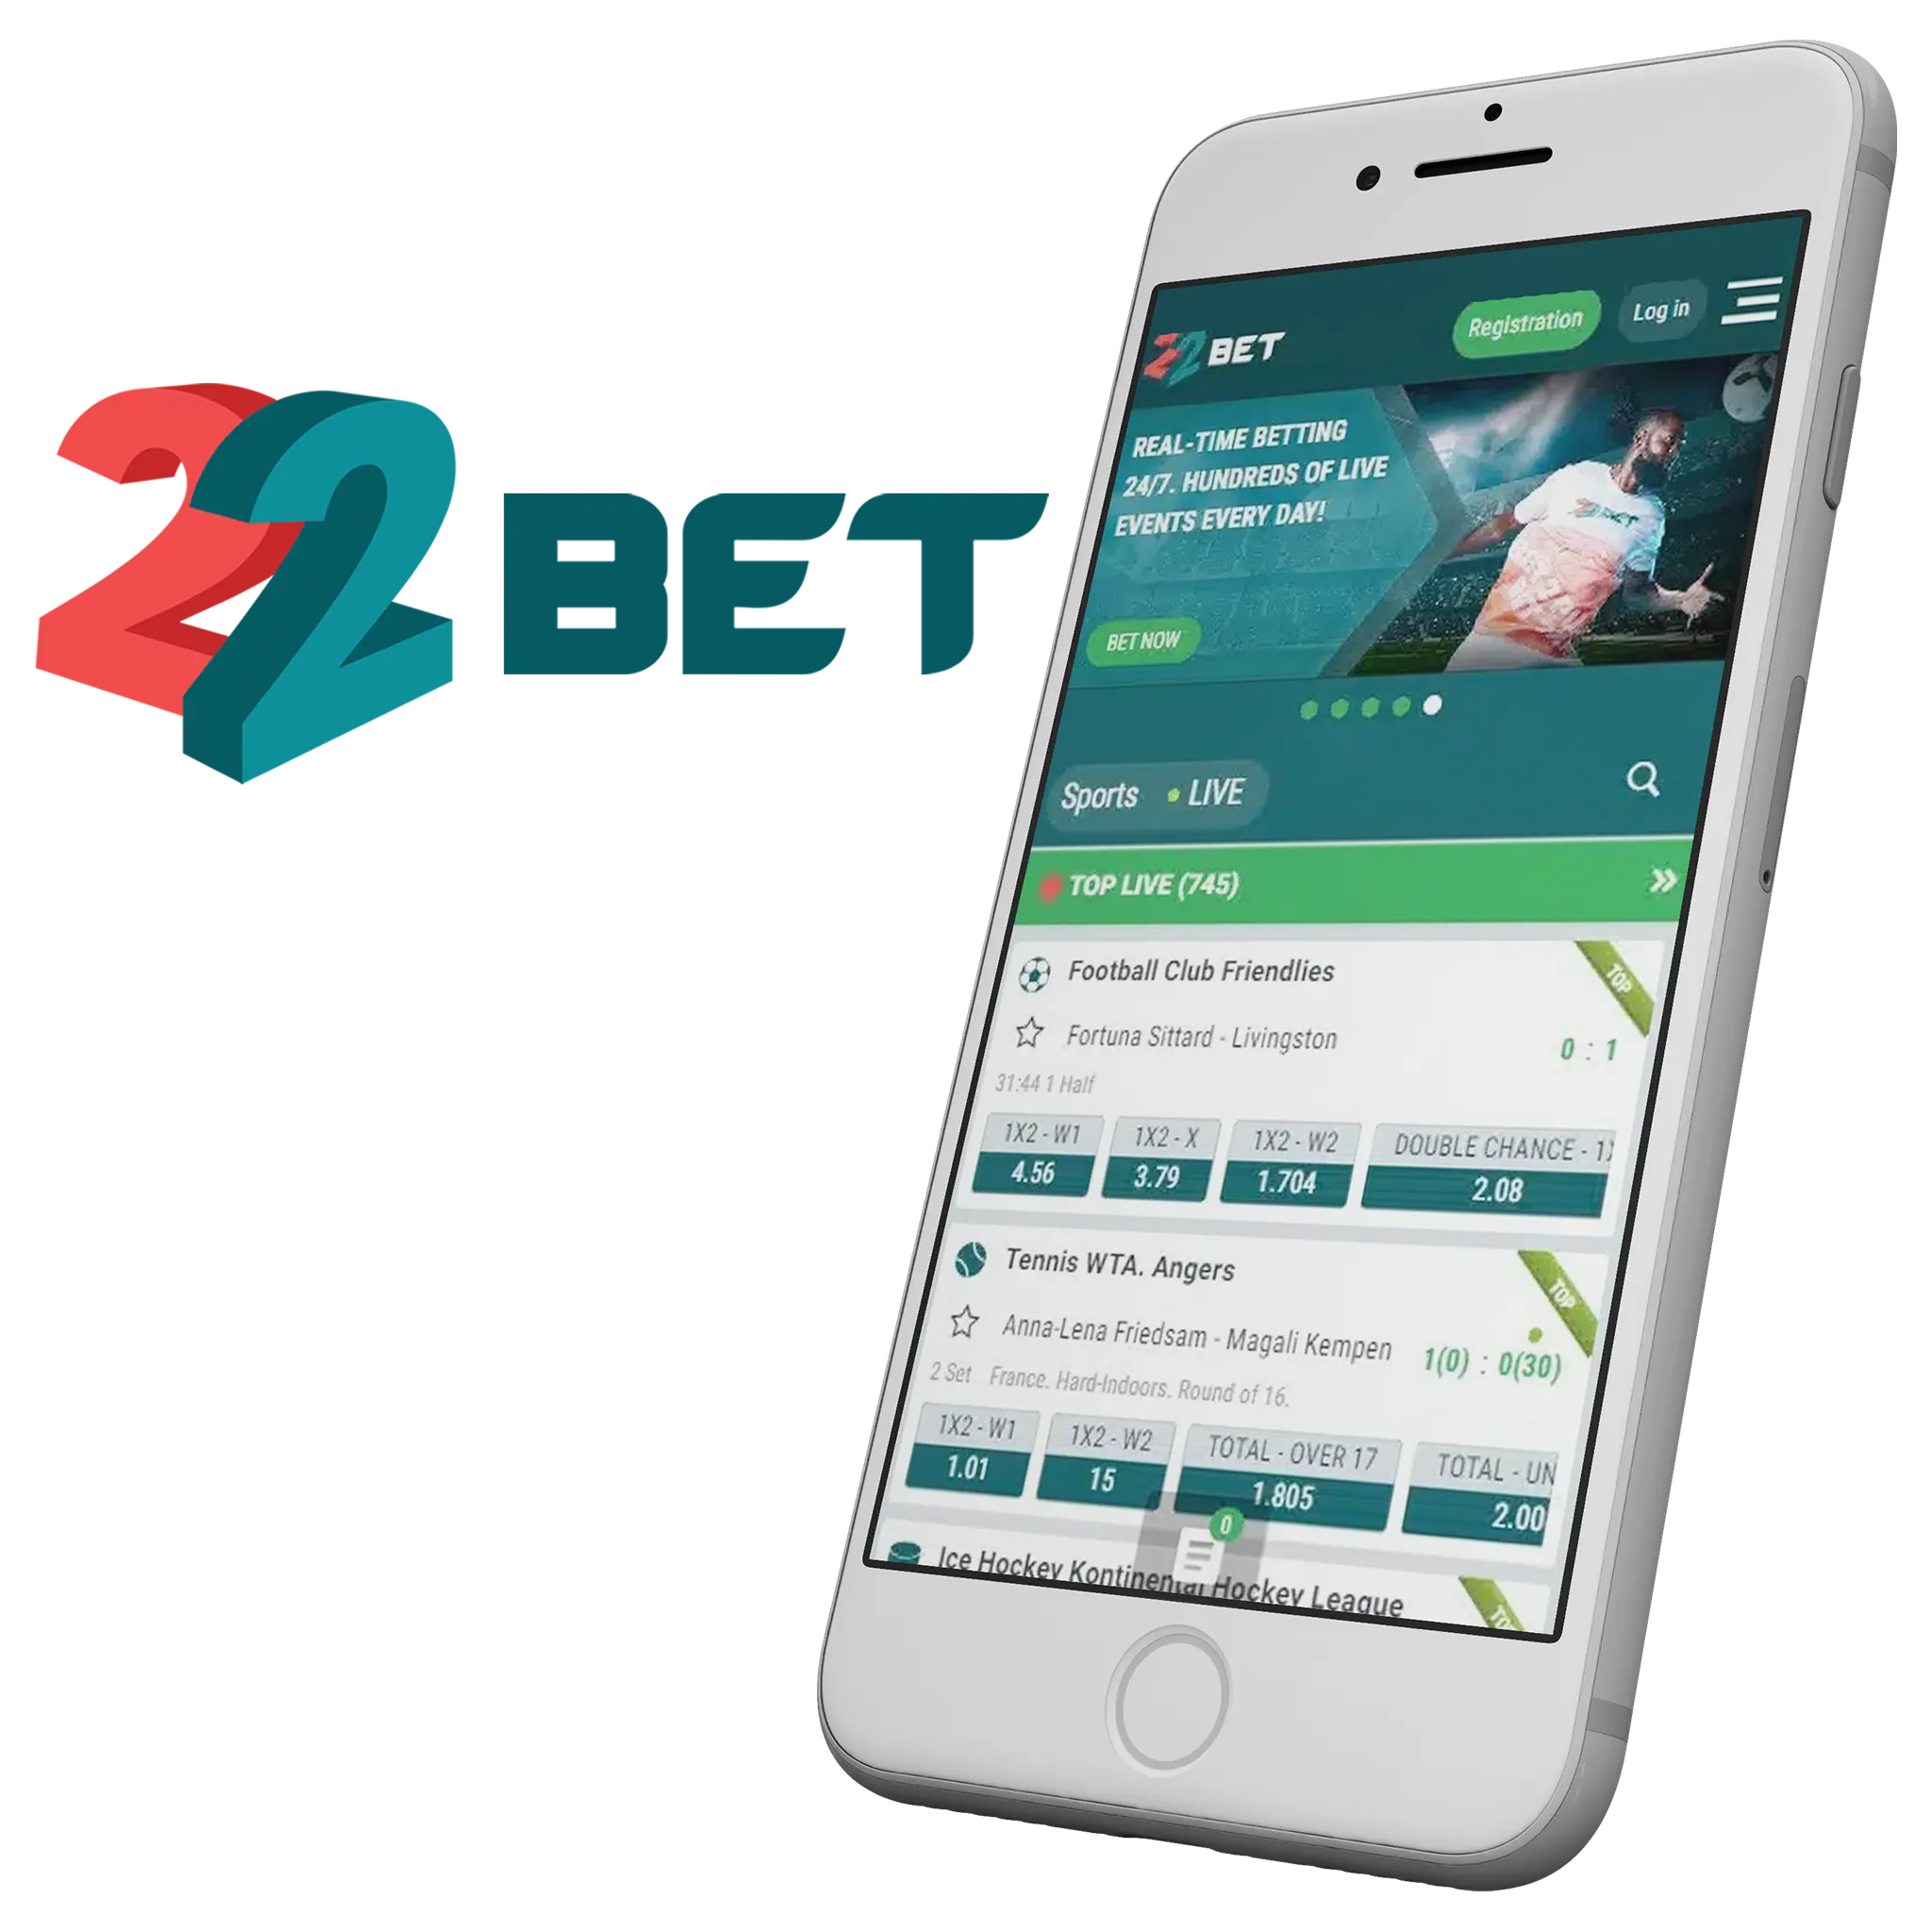 22bet mobile app is very convenient to place bets on cricket